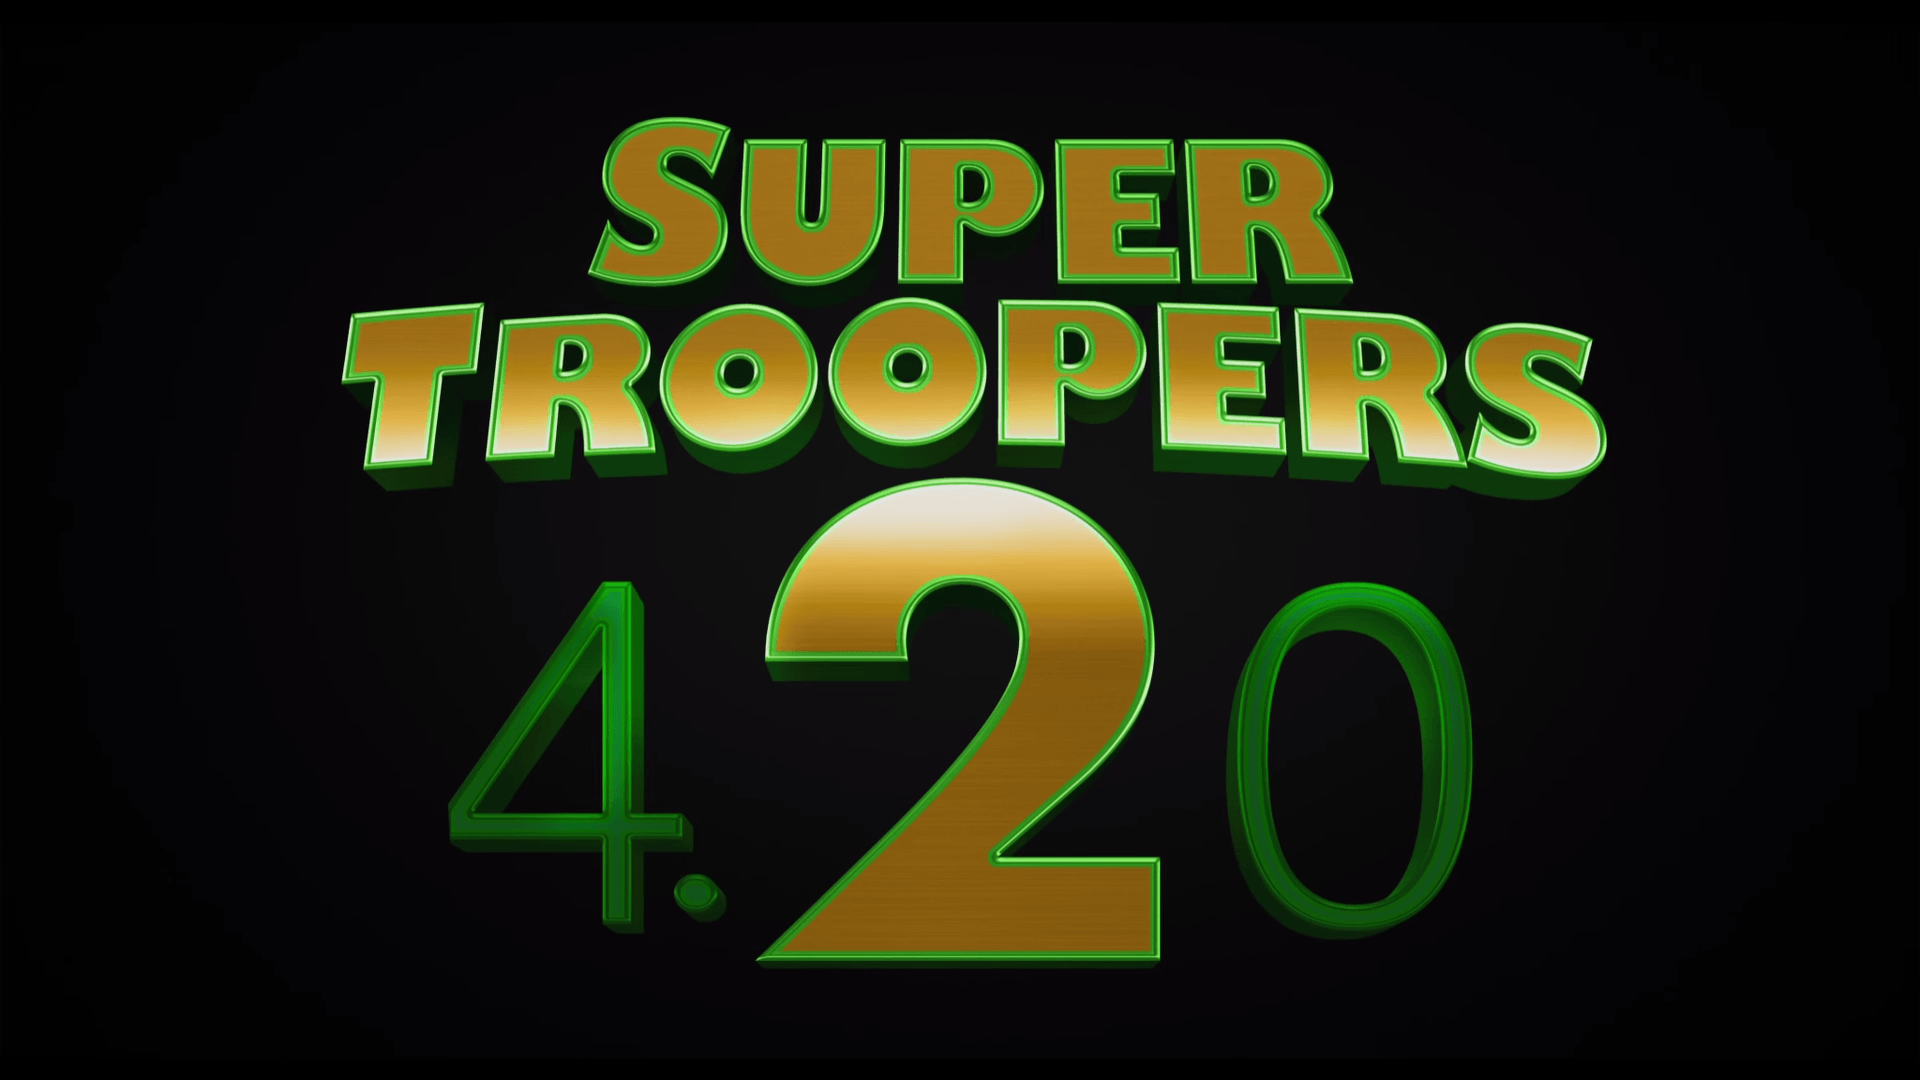 Super Troopers 2 Finally Has a New and Release Date!